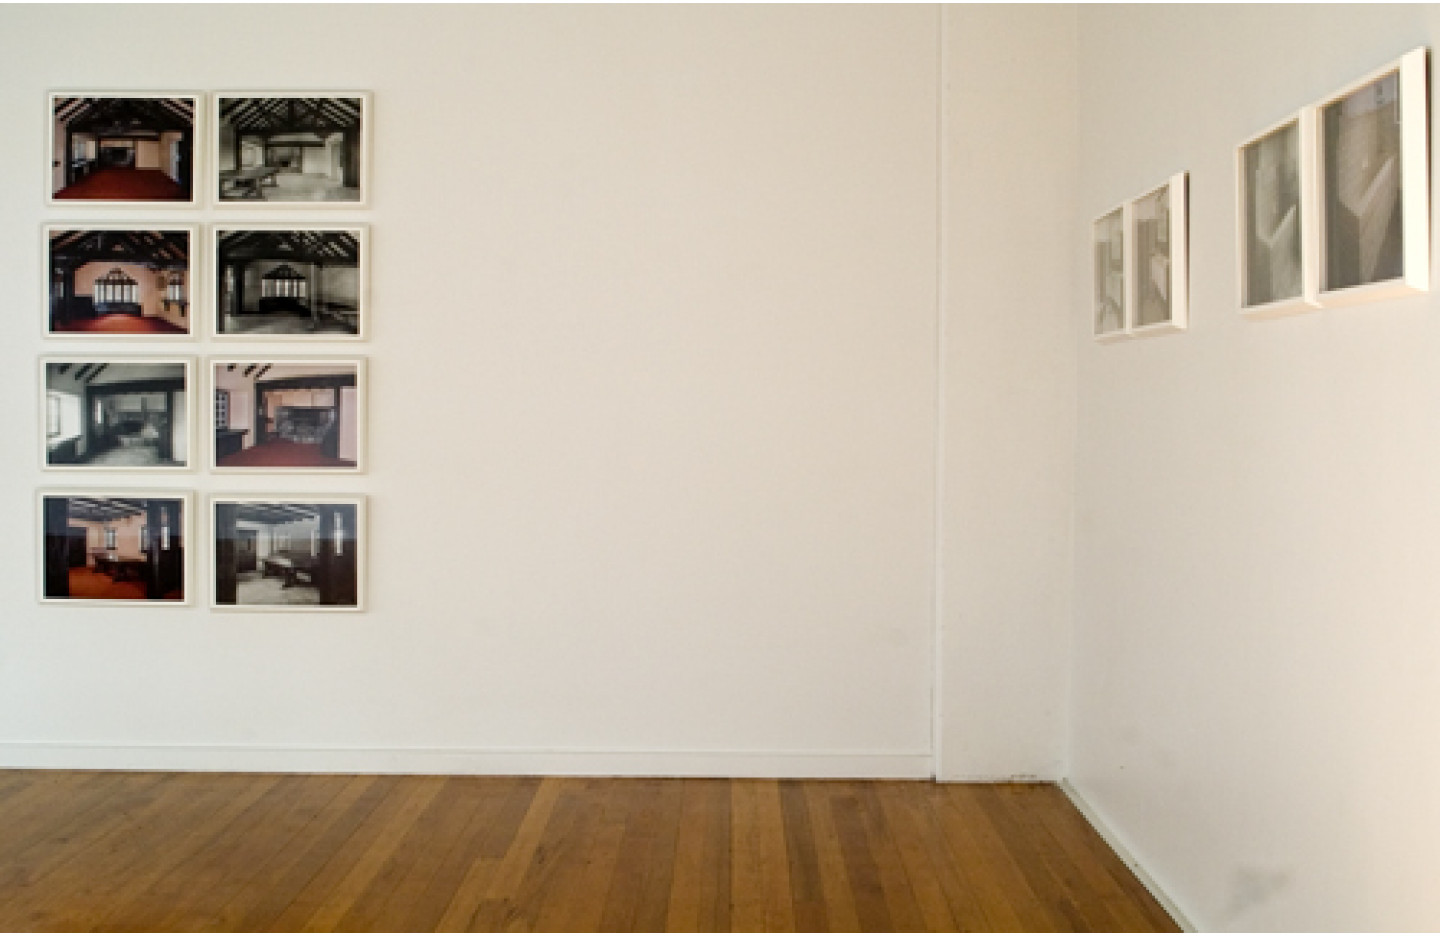 26 Photographs of a House, Ramp Gallery (2007)